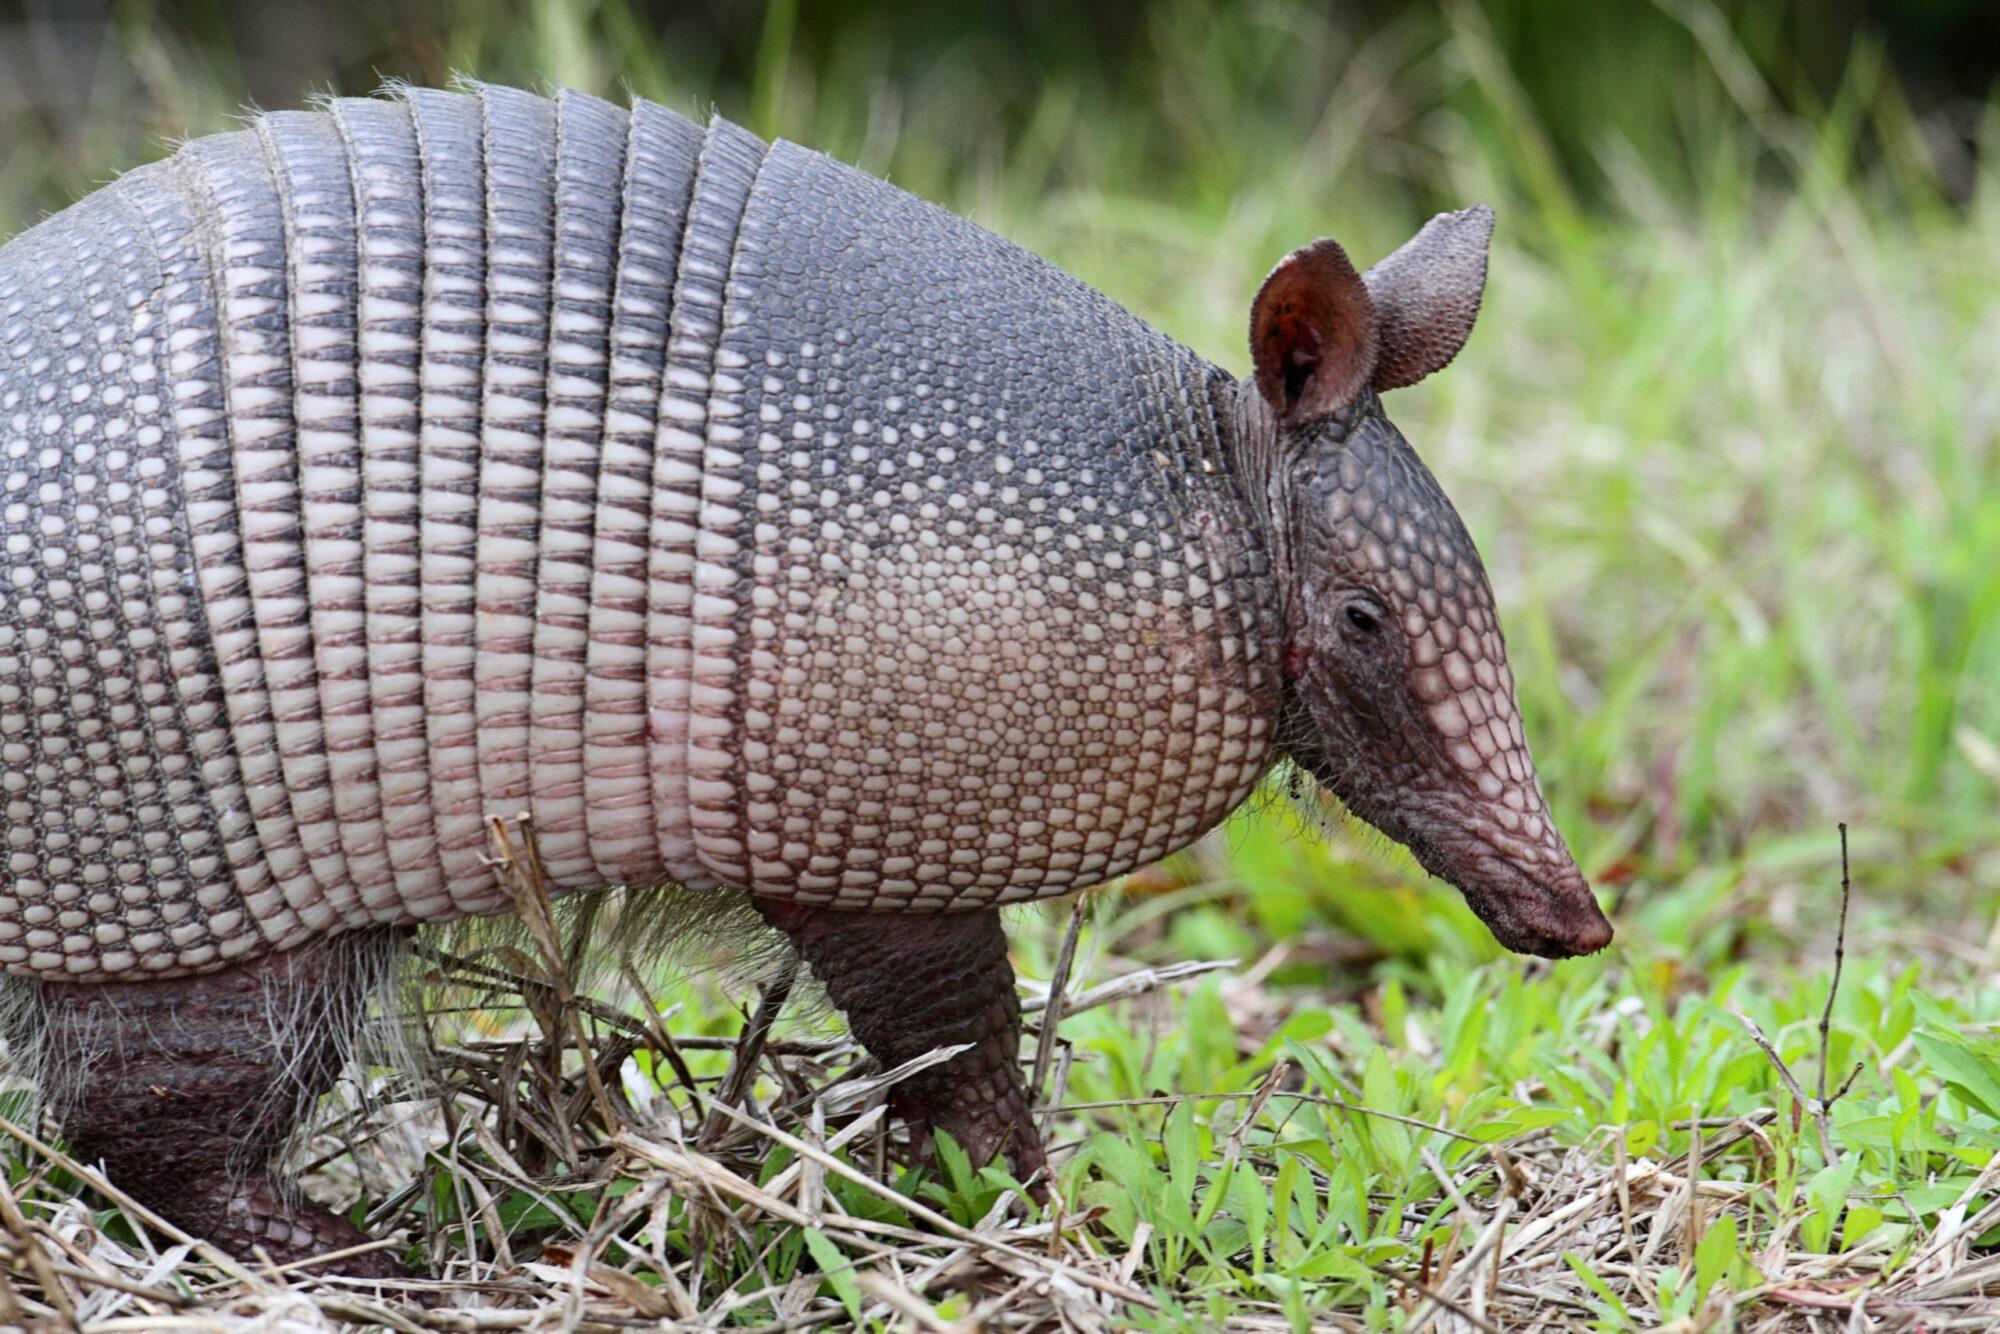 How to Get rid of an Armadillo Invasion - Elite Wildlife Service